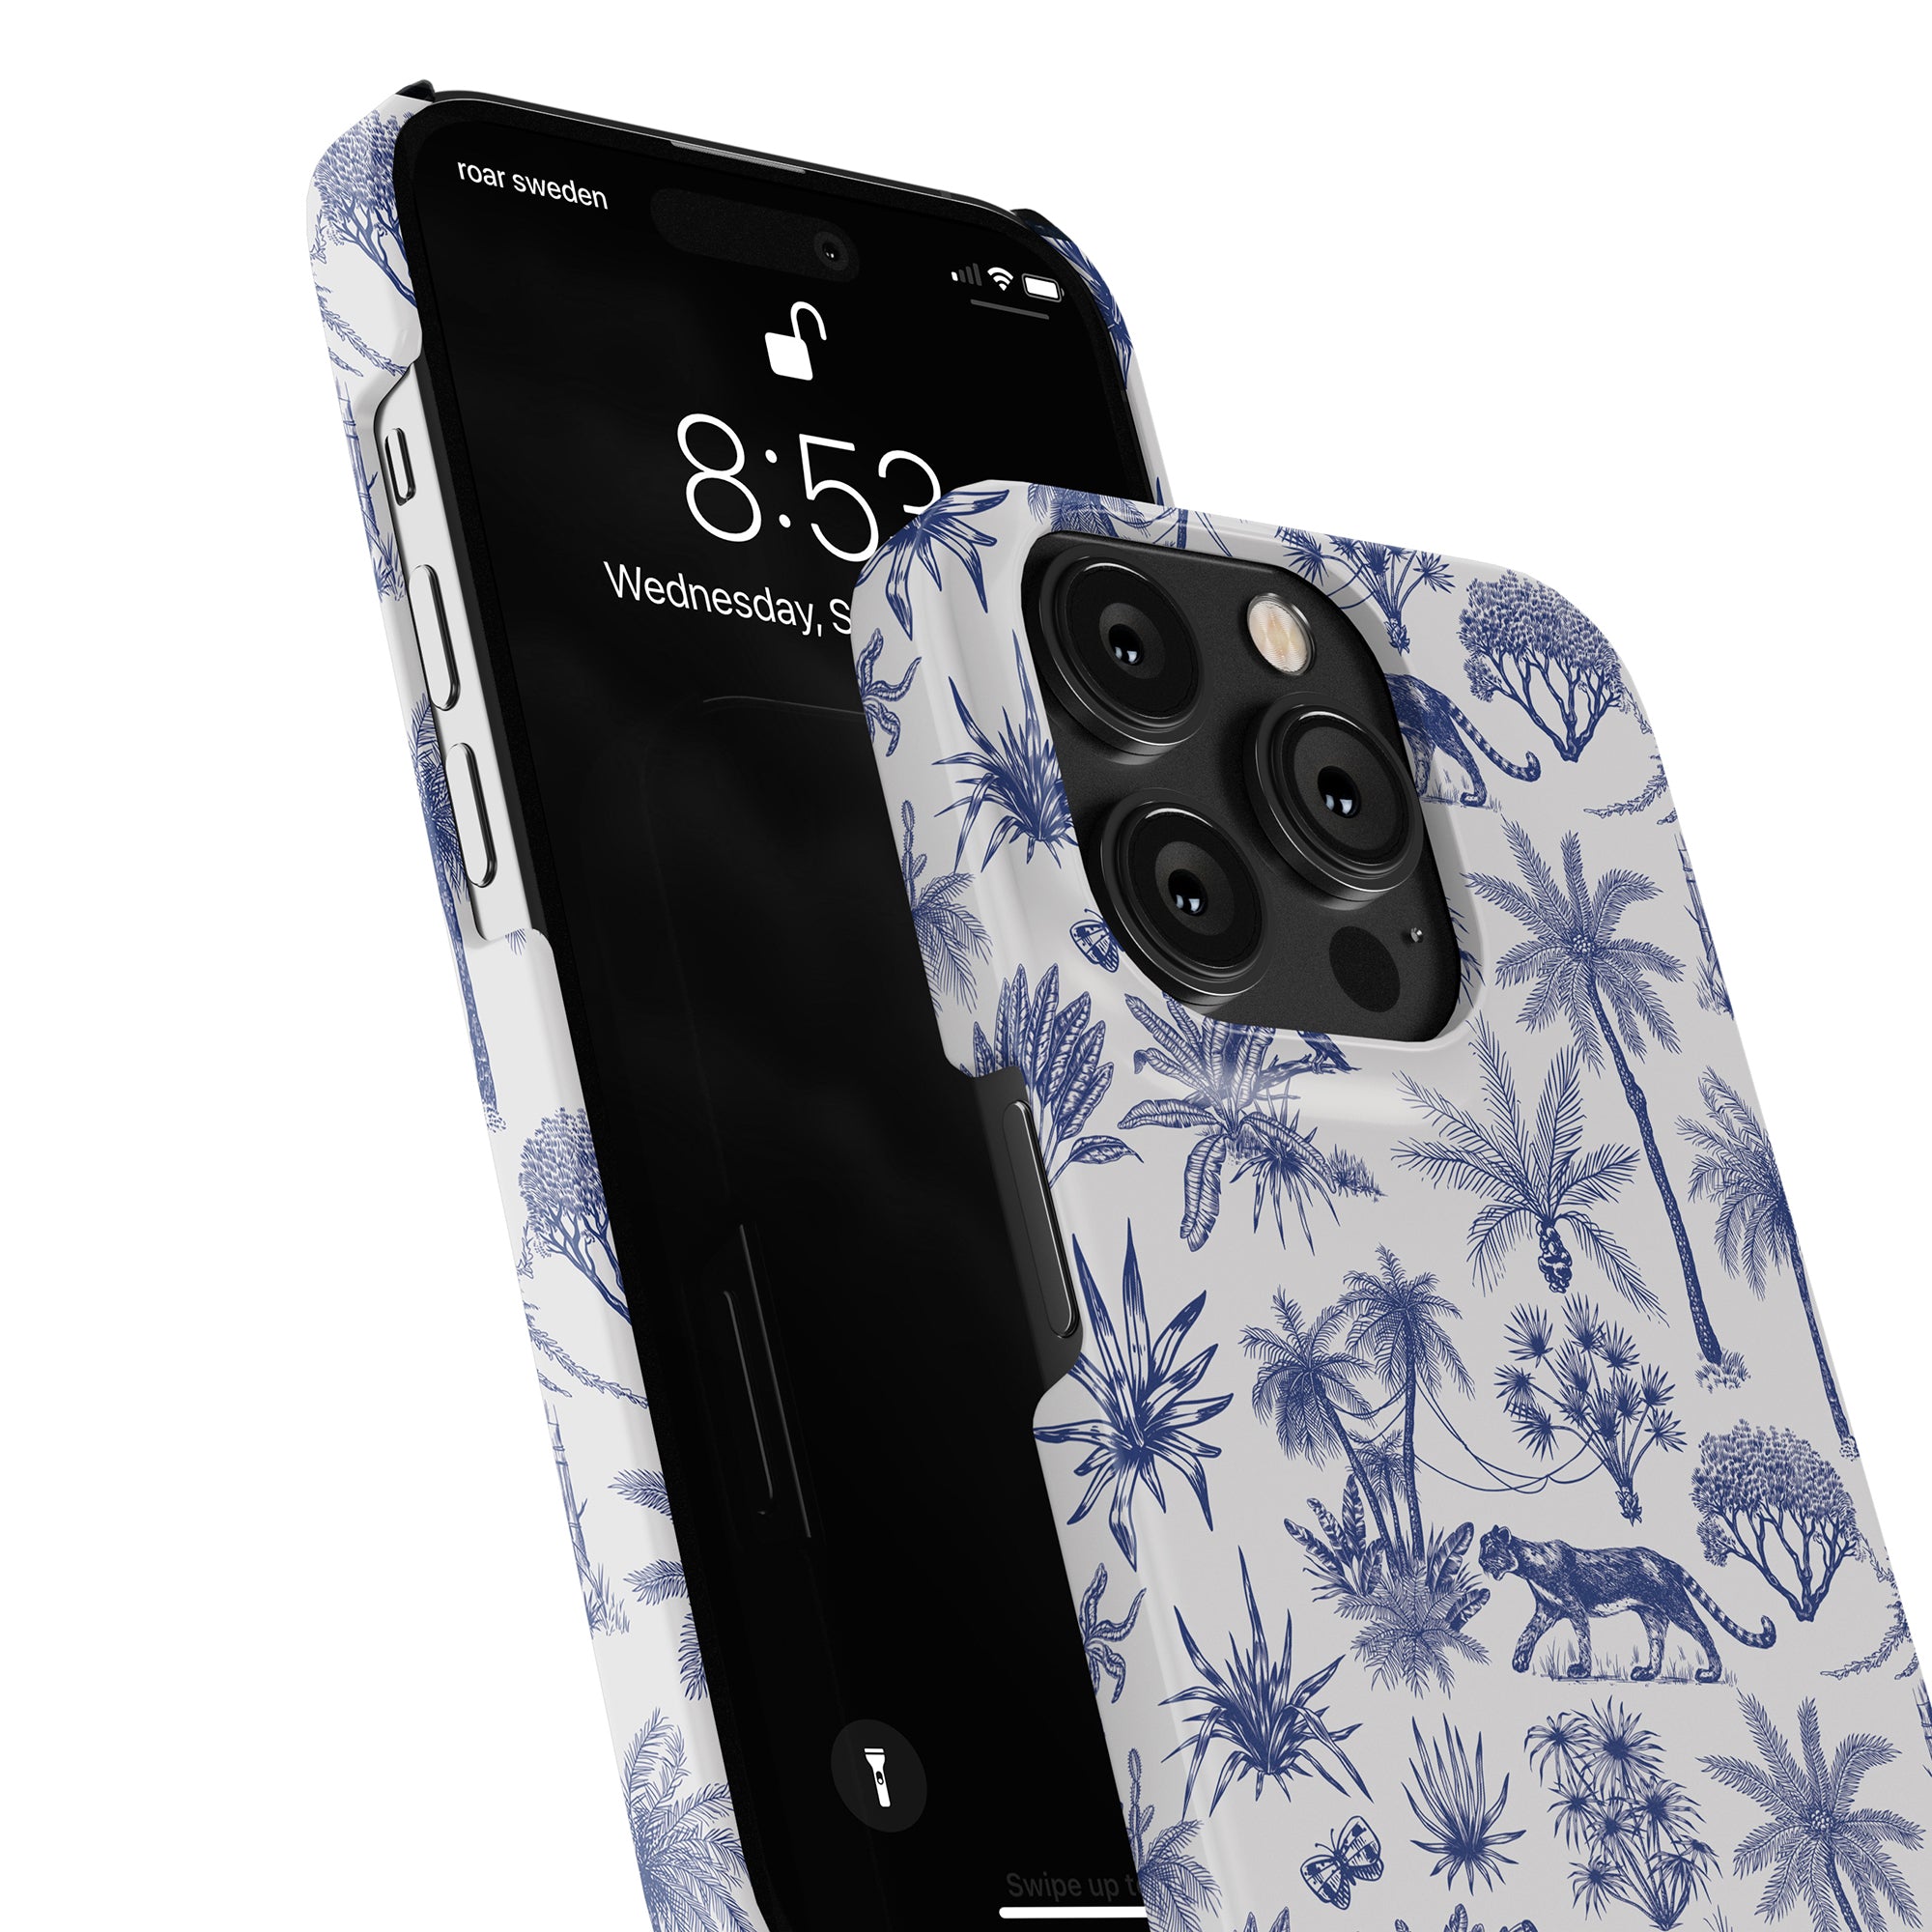 A lightweight smartphone with a Toile De Jouy - Slim case showcasing blue palm leaves and tigers, viewed from an angle that emphasizes its screen and camera module.